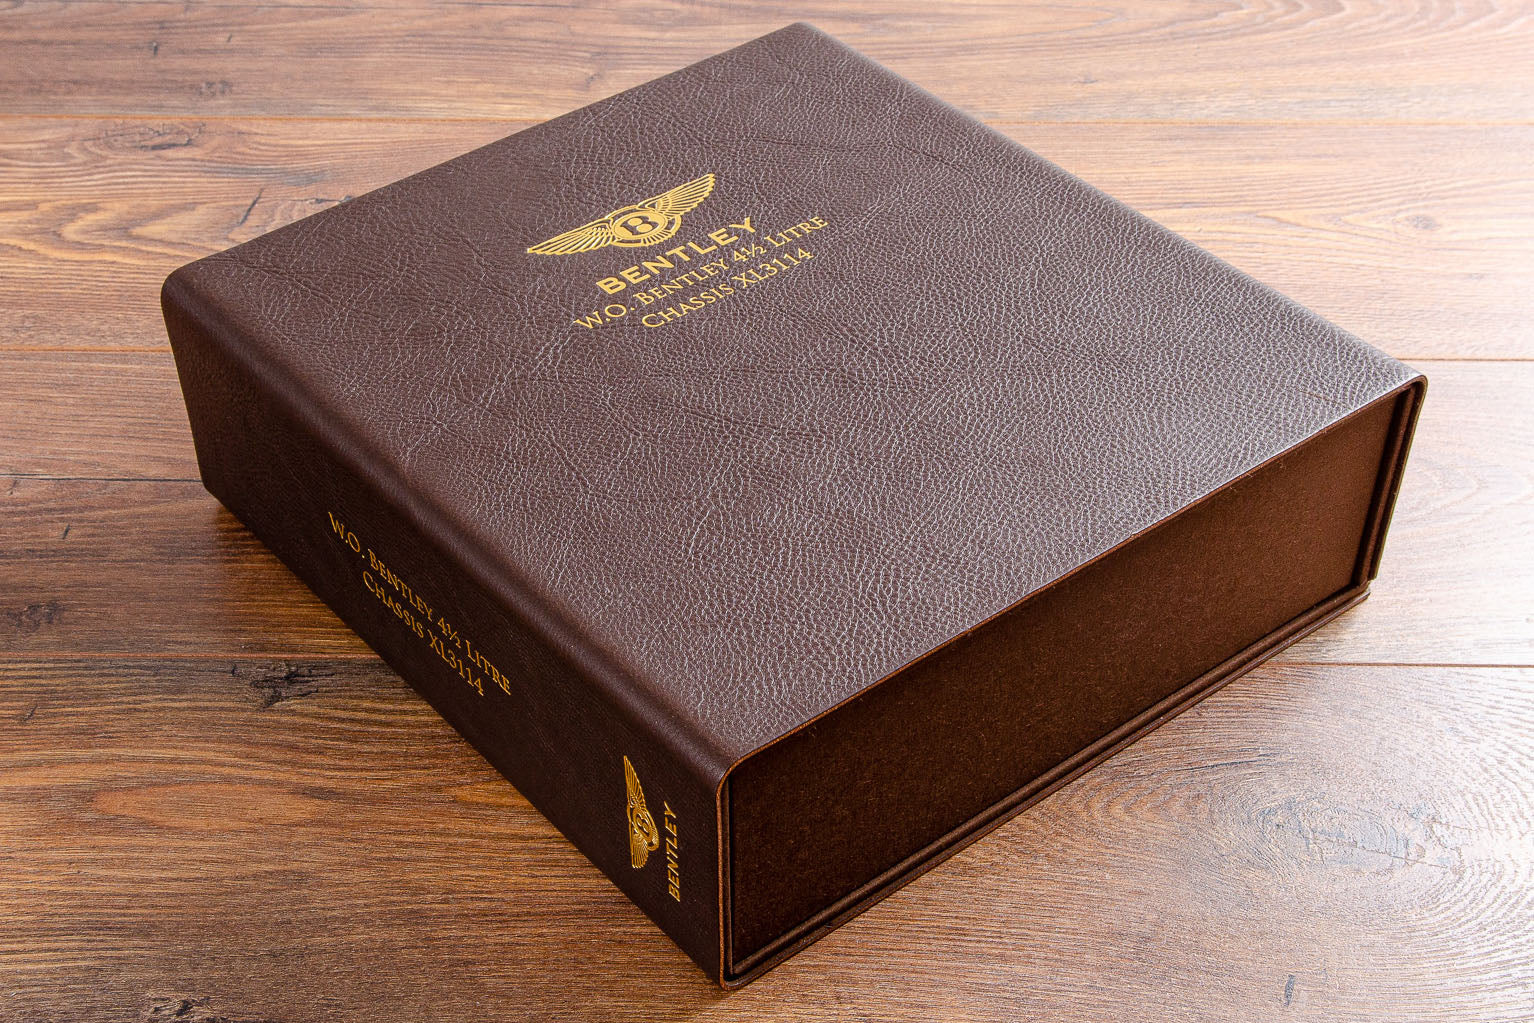 A4 leather box file for car documents and history in brown 2.5mm veg tanned leather with gold foil personalisation